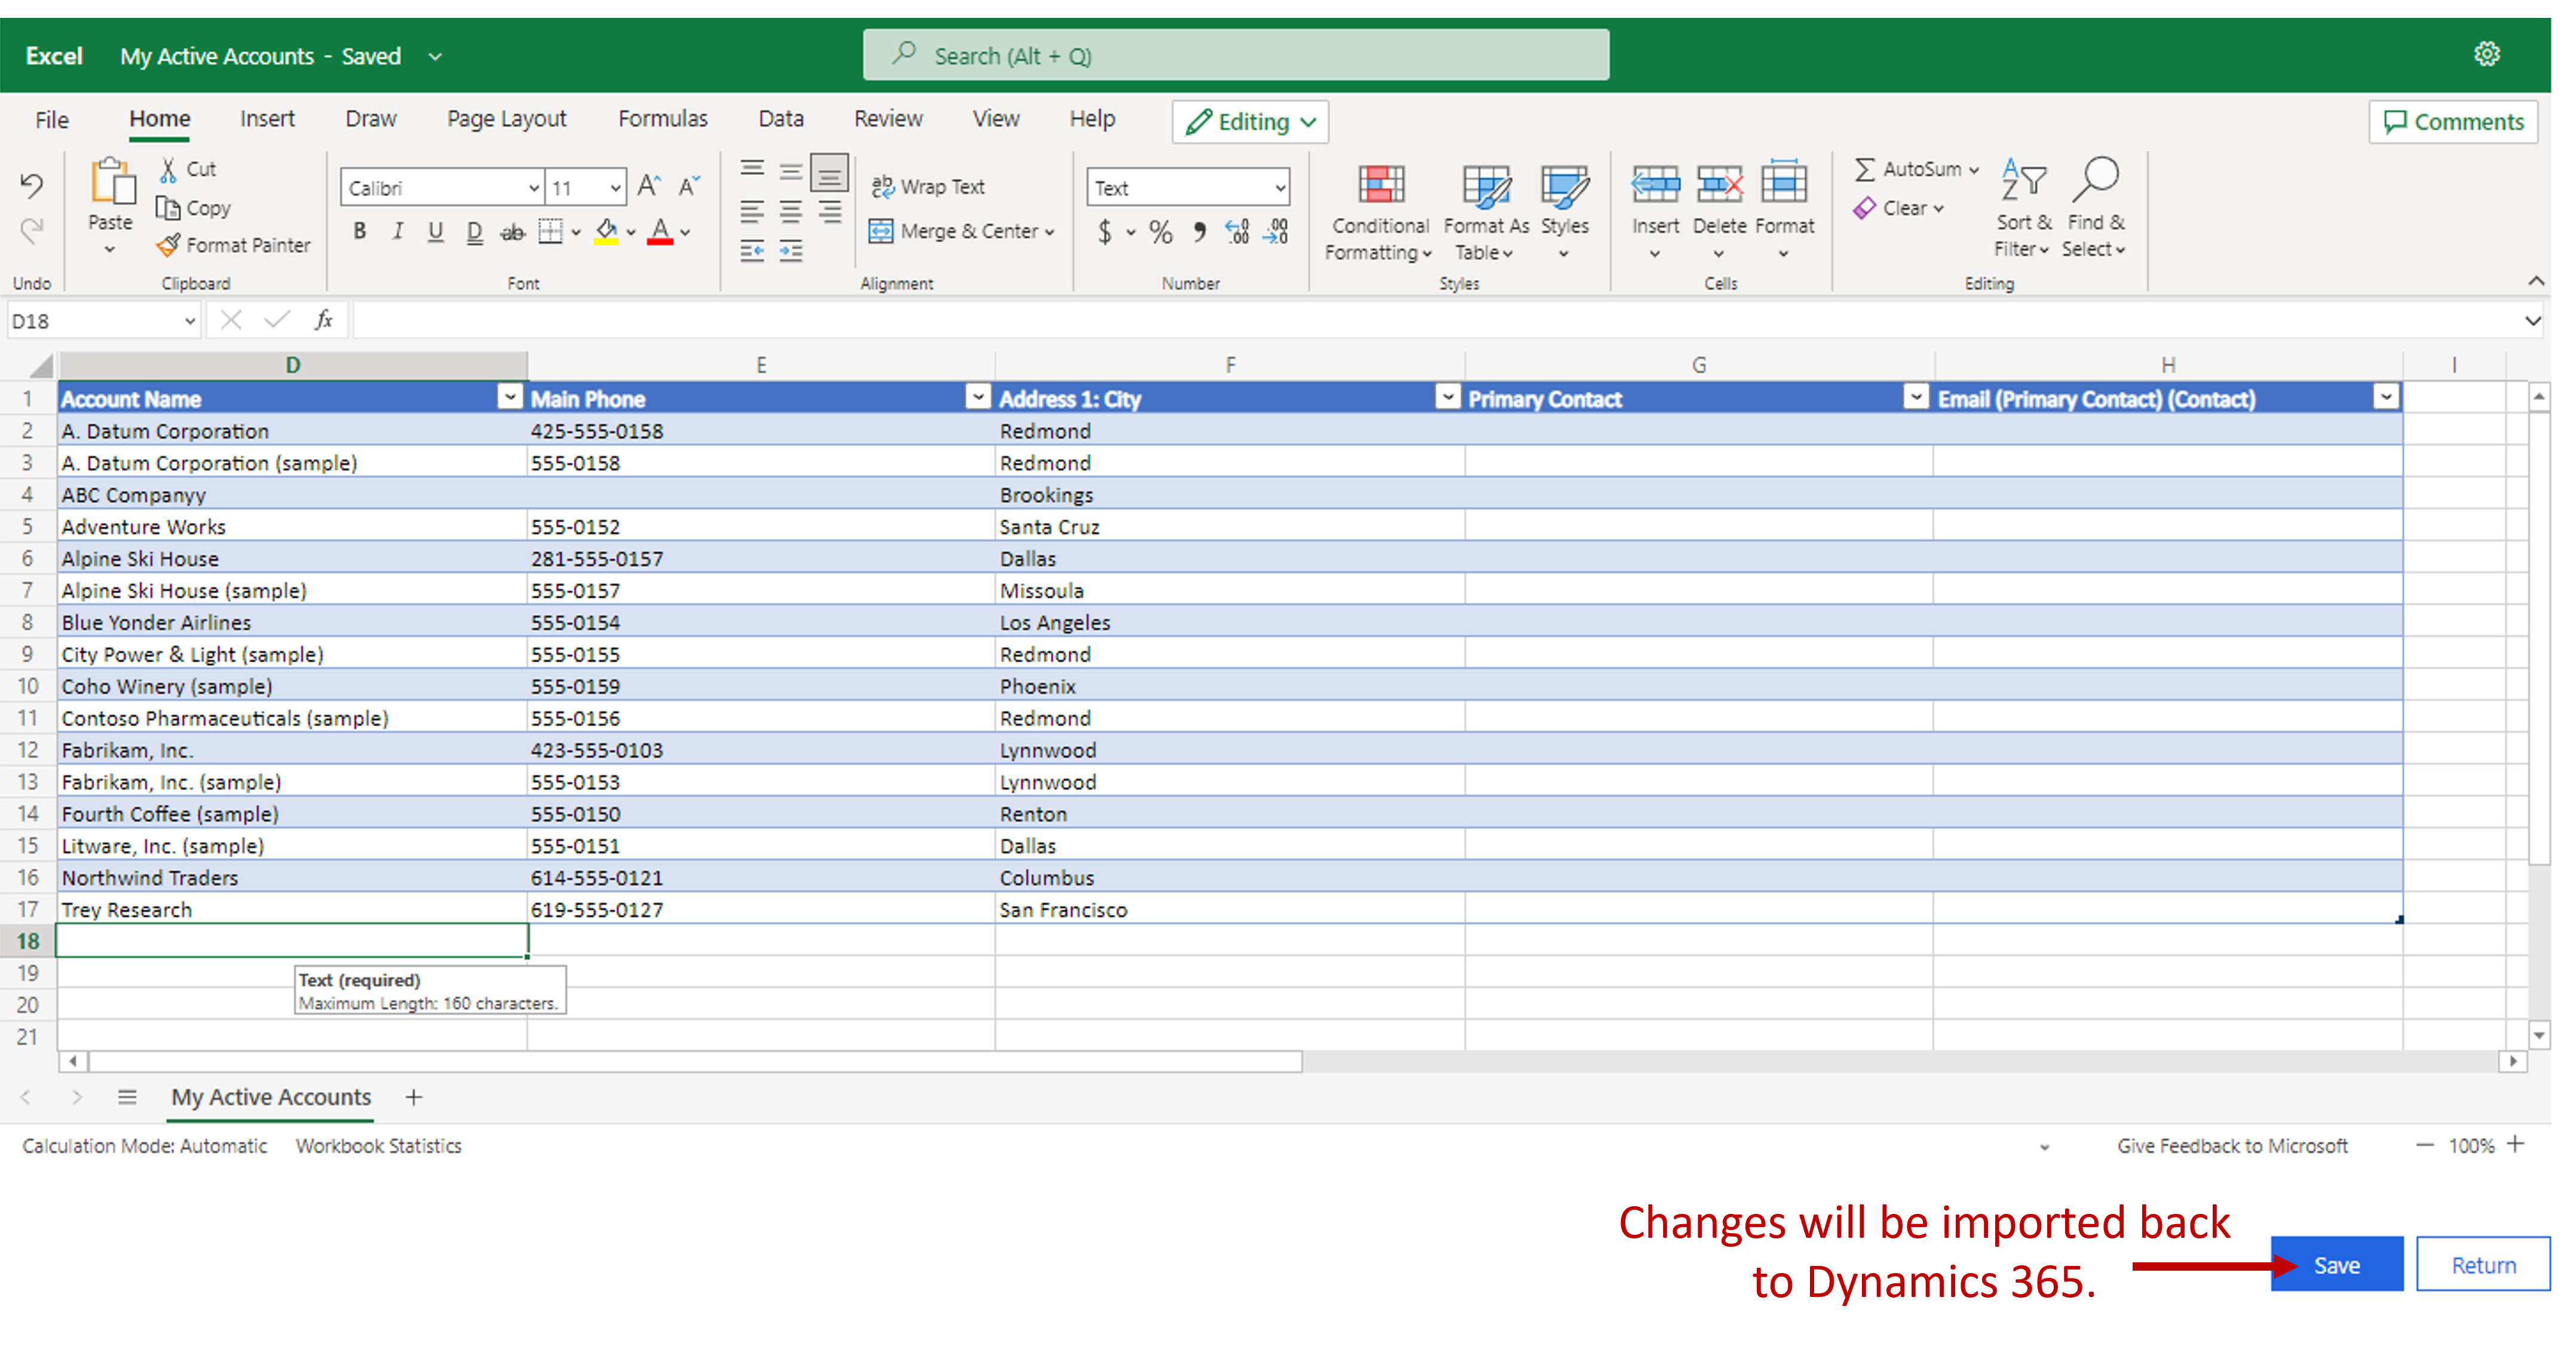 Dynamics 365 data in Excel Online. Save button is highlighted. Changes are imported back to Dynamics 365 when you select Save.